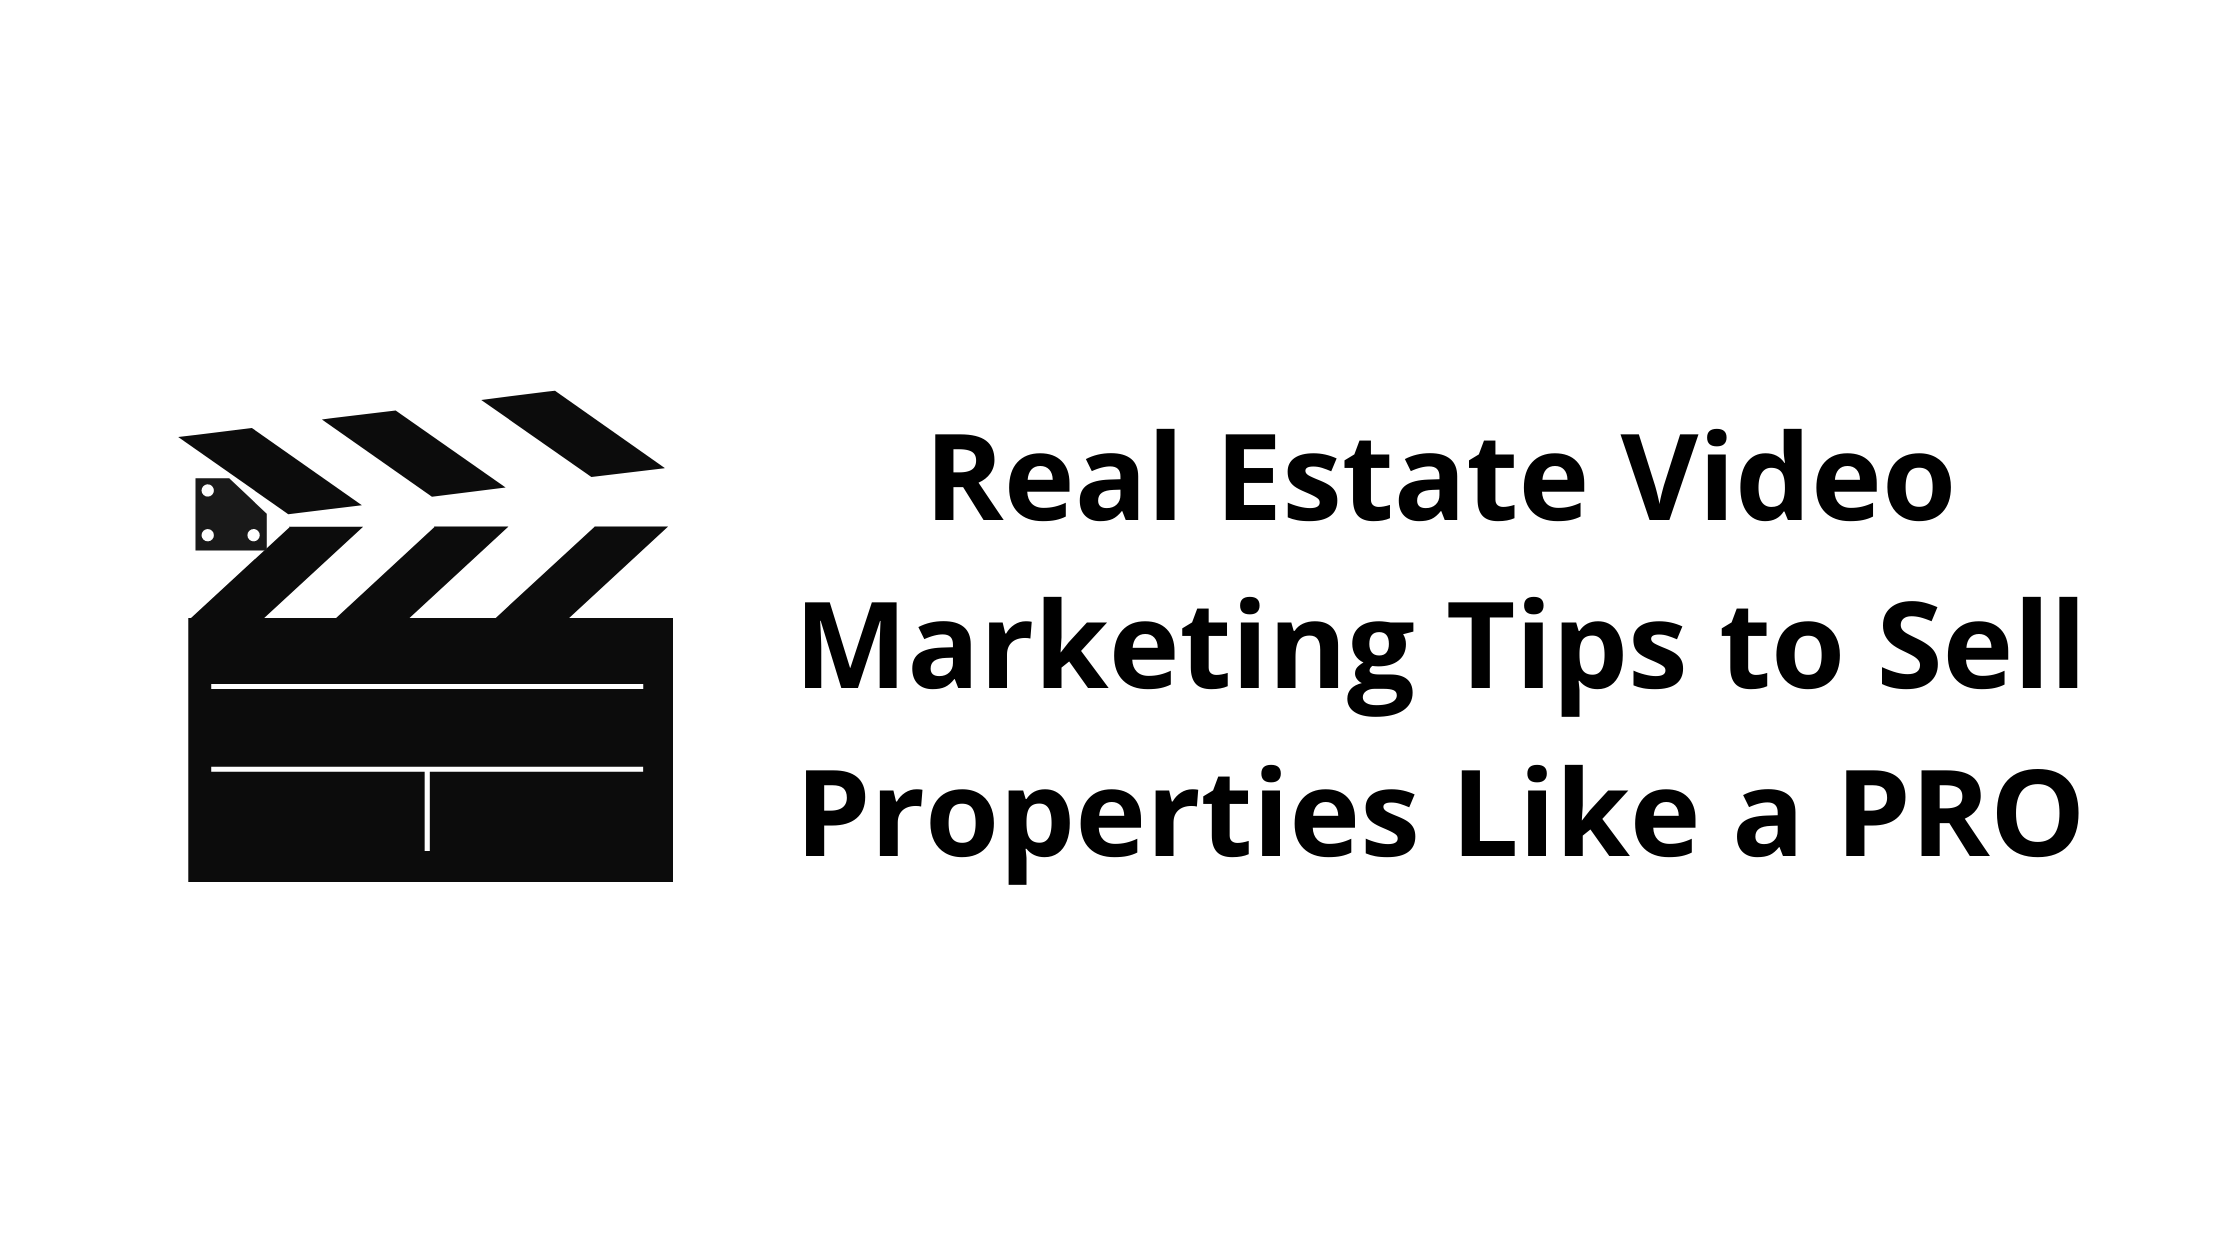 Real Estate Video Marketing Tips to Sell Properties Like a PRO